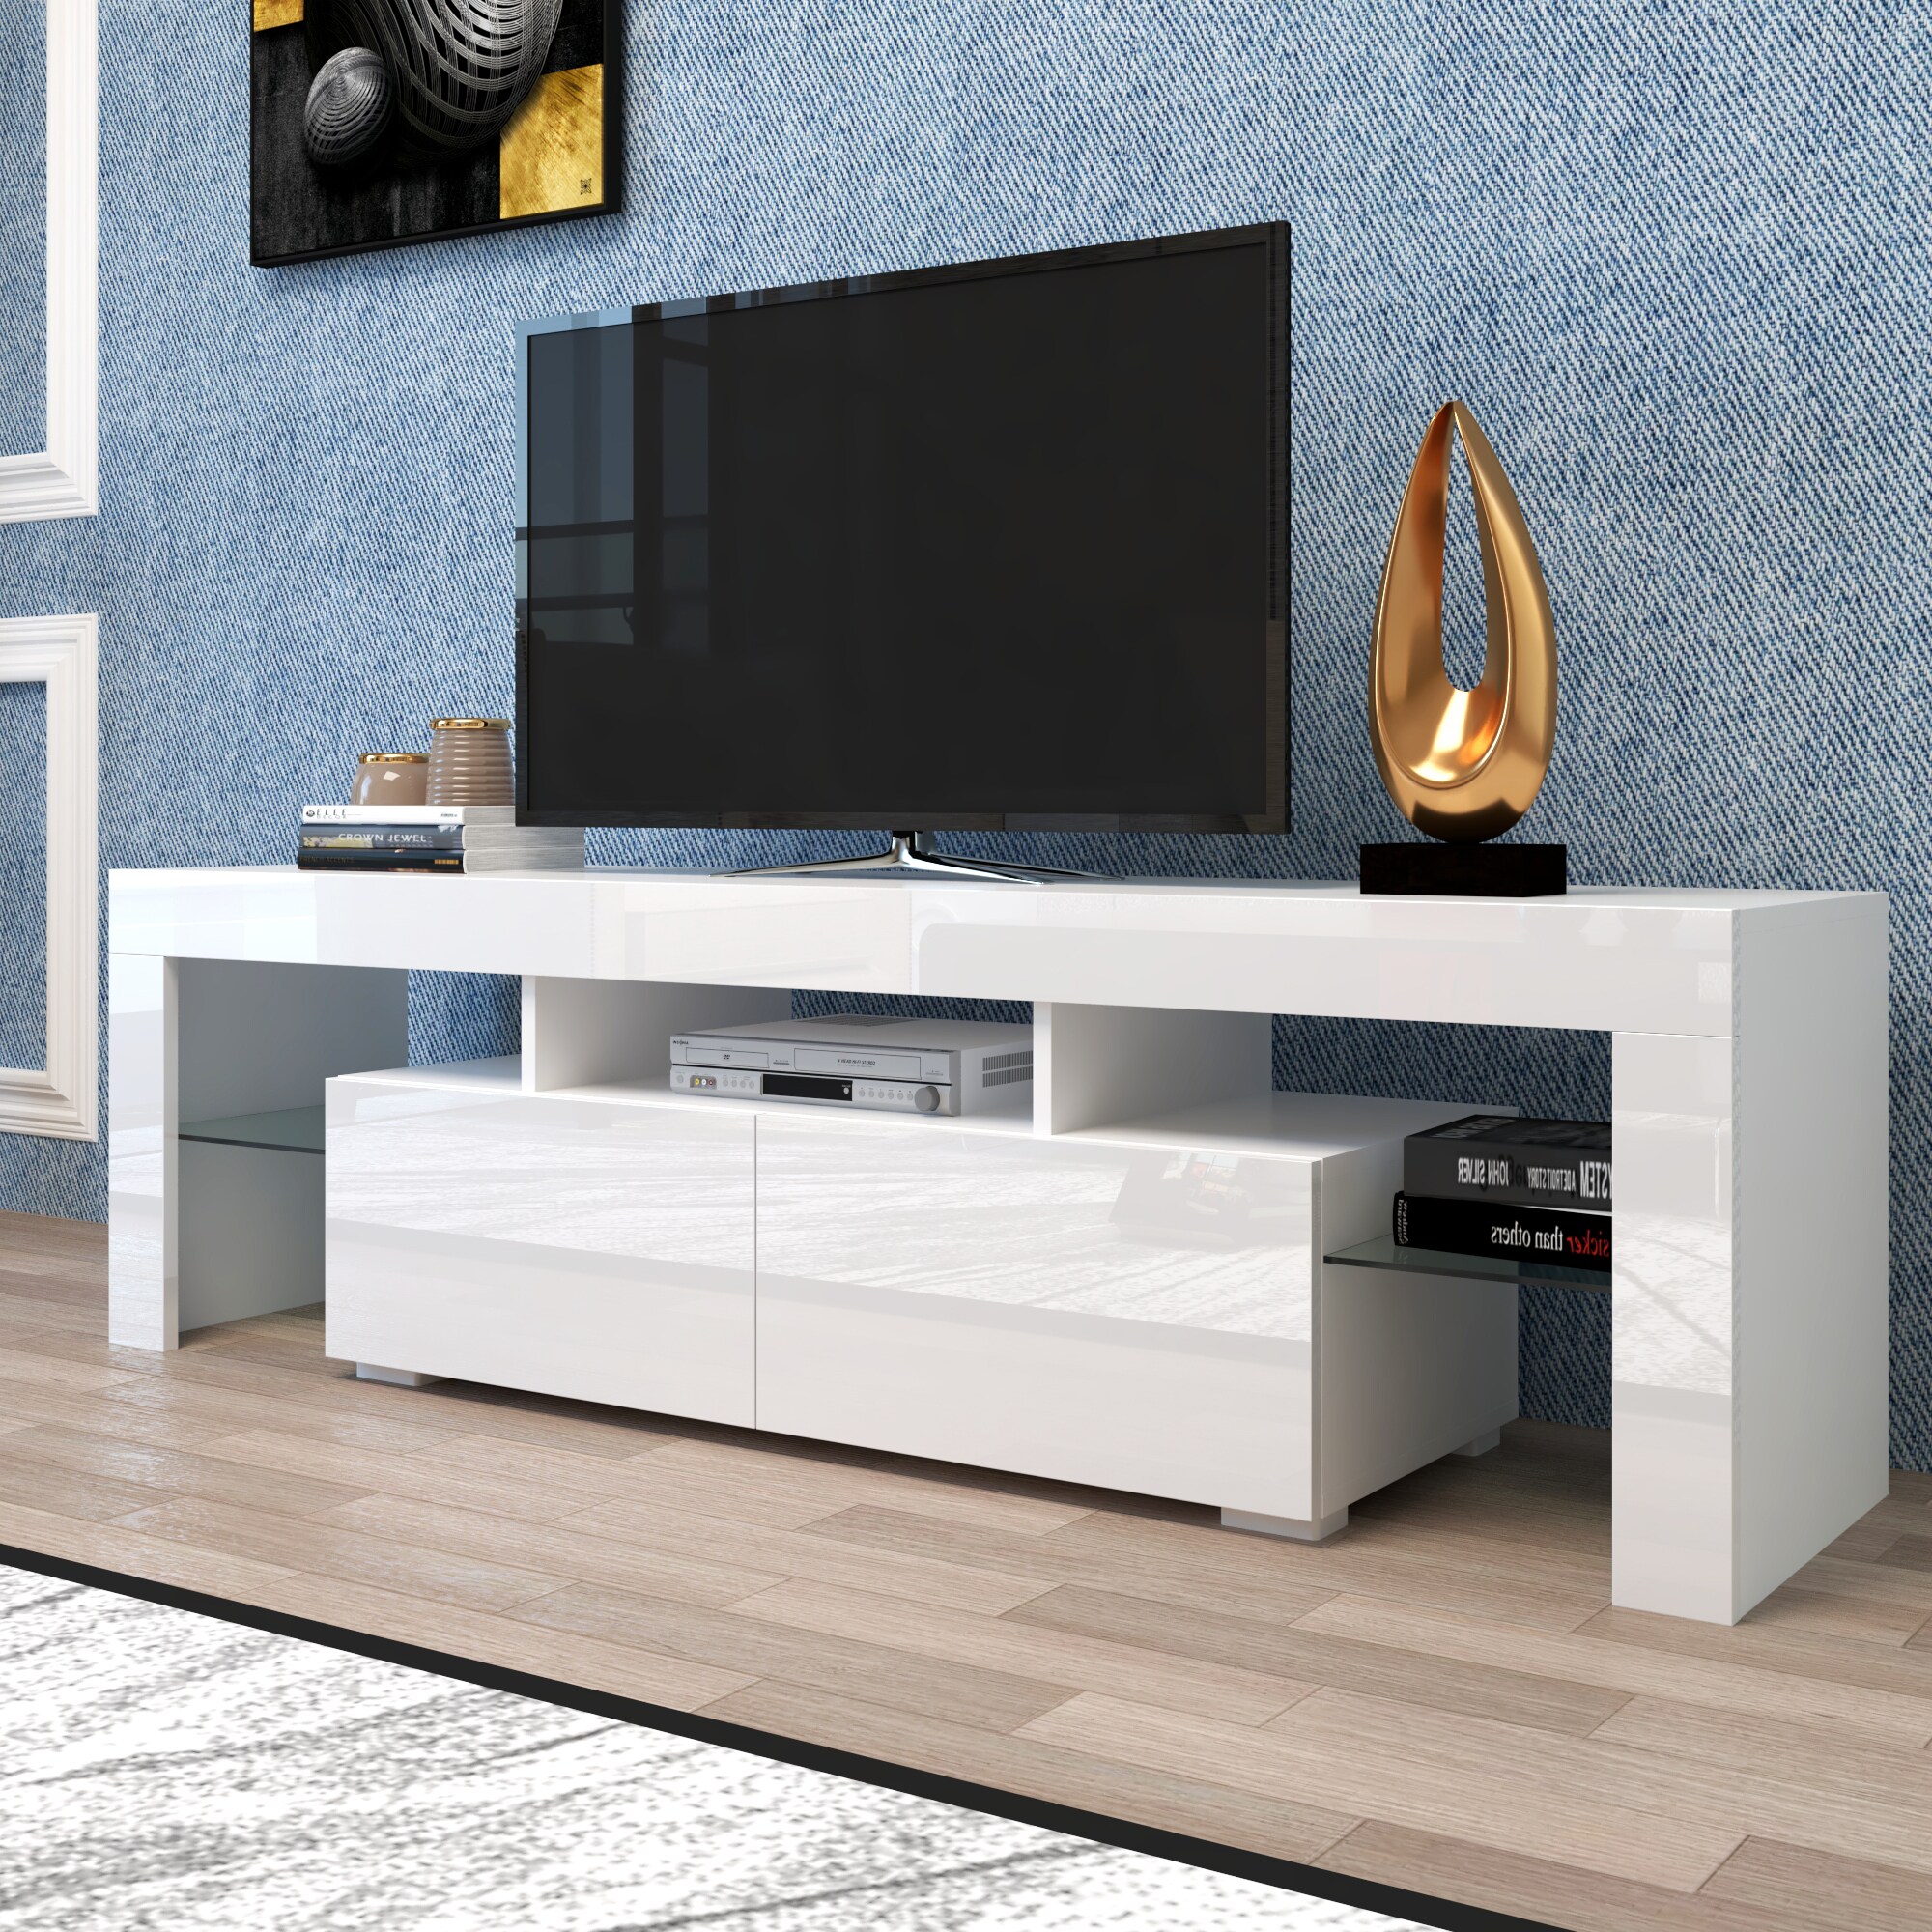 Living Room furniture set GREY White entertainment unit tv stand New sideboard 